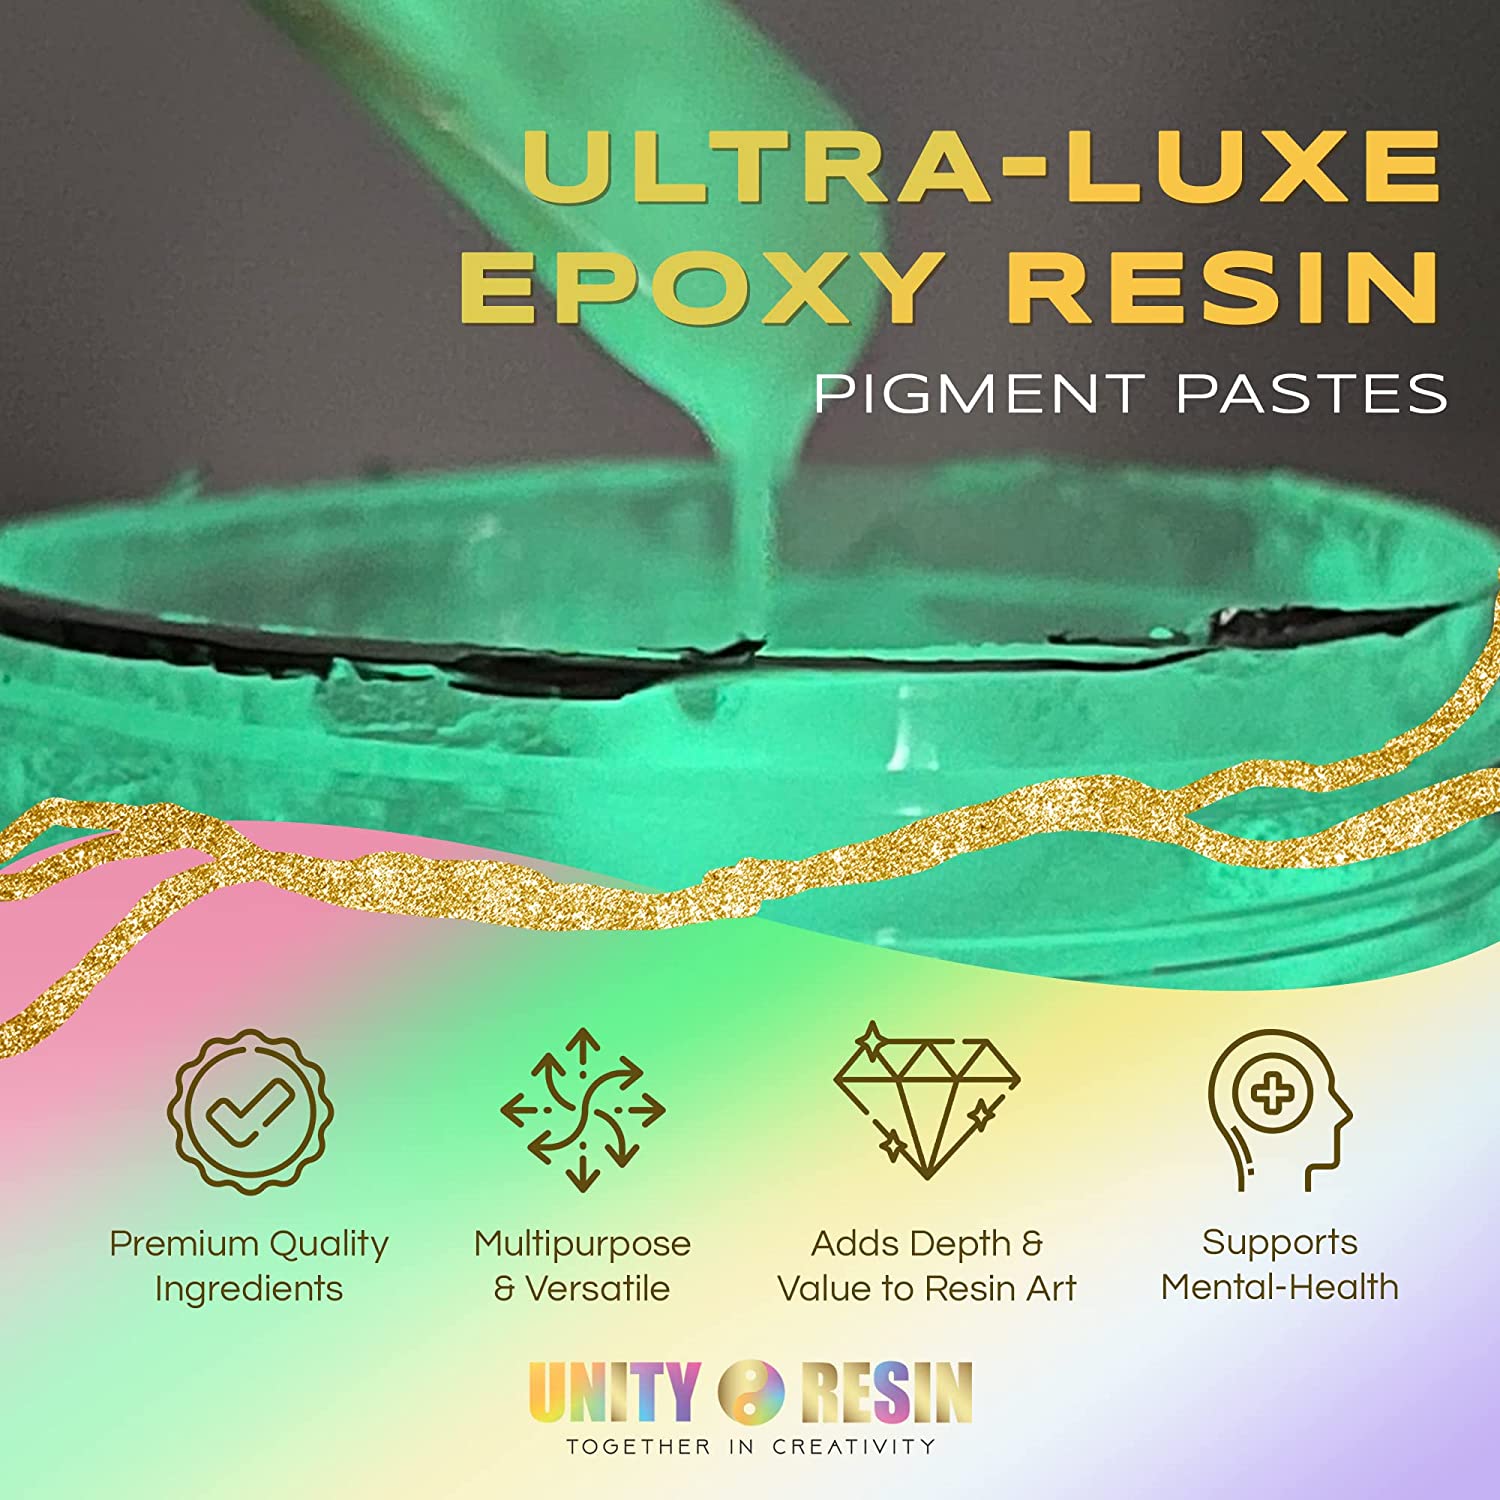 Ultra-Luxe Epoxy Resin Pigment Paste-GLEAMING GOLD (100G)